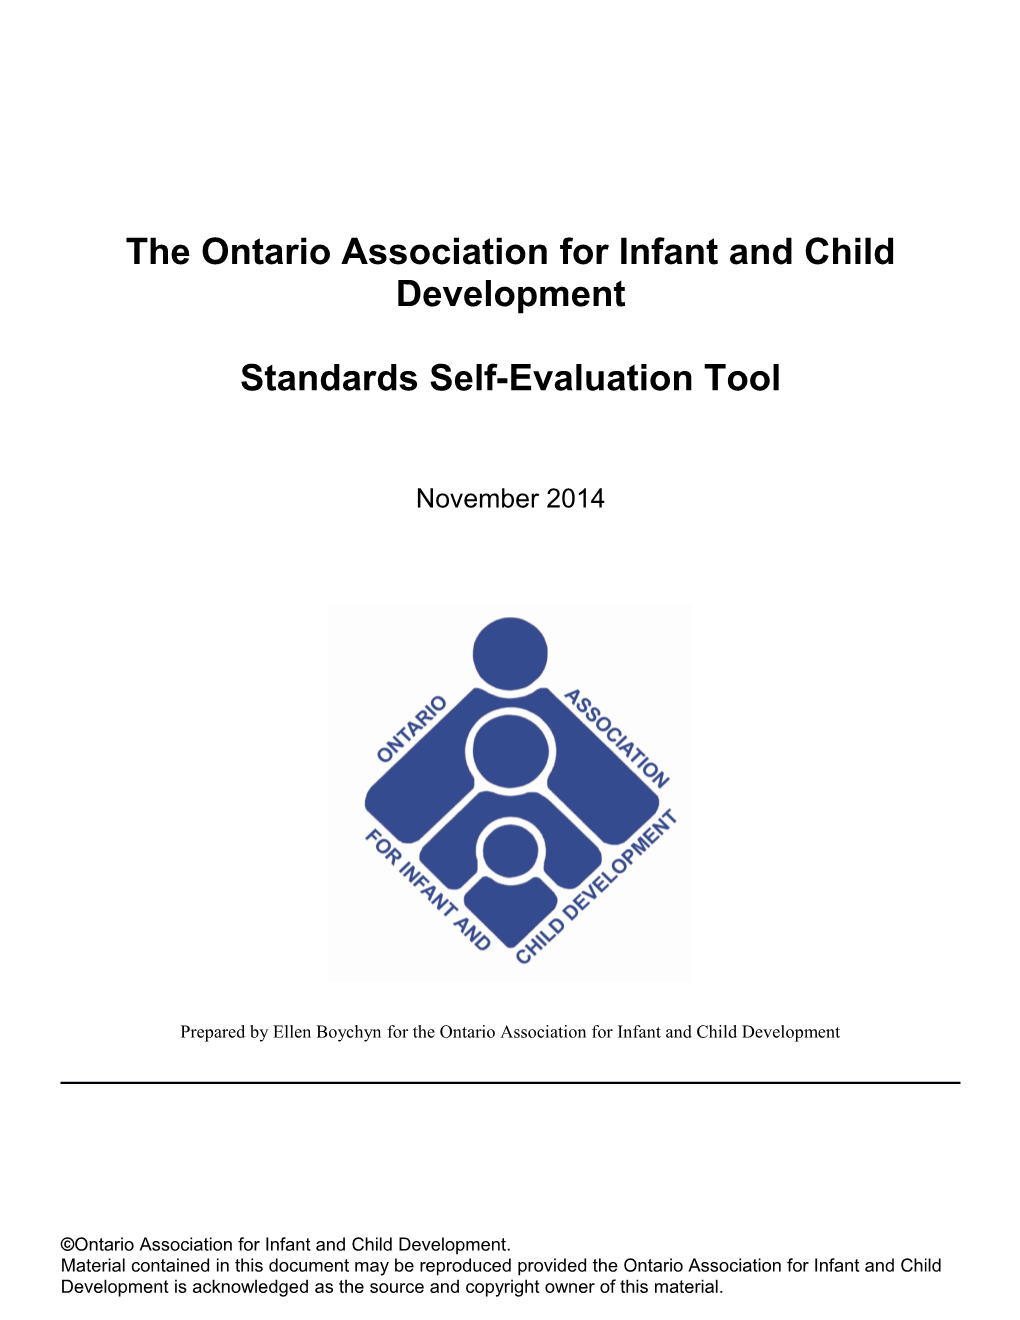 The Ontario Associationfor Infant and Child Development